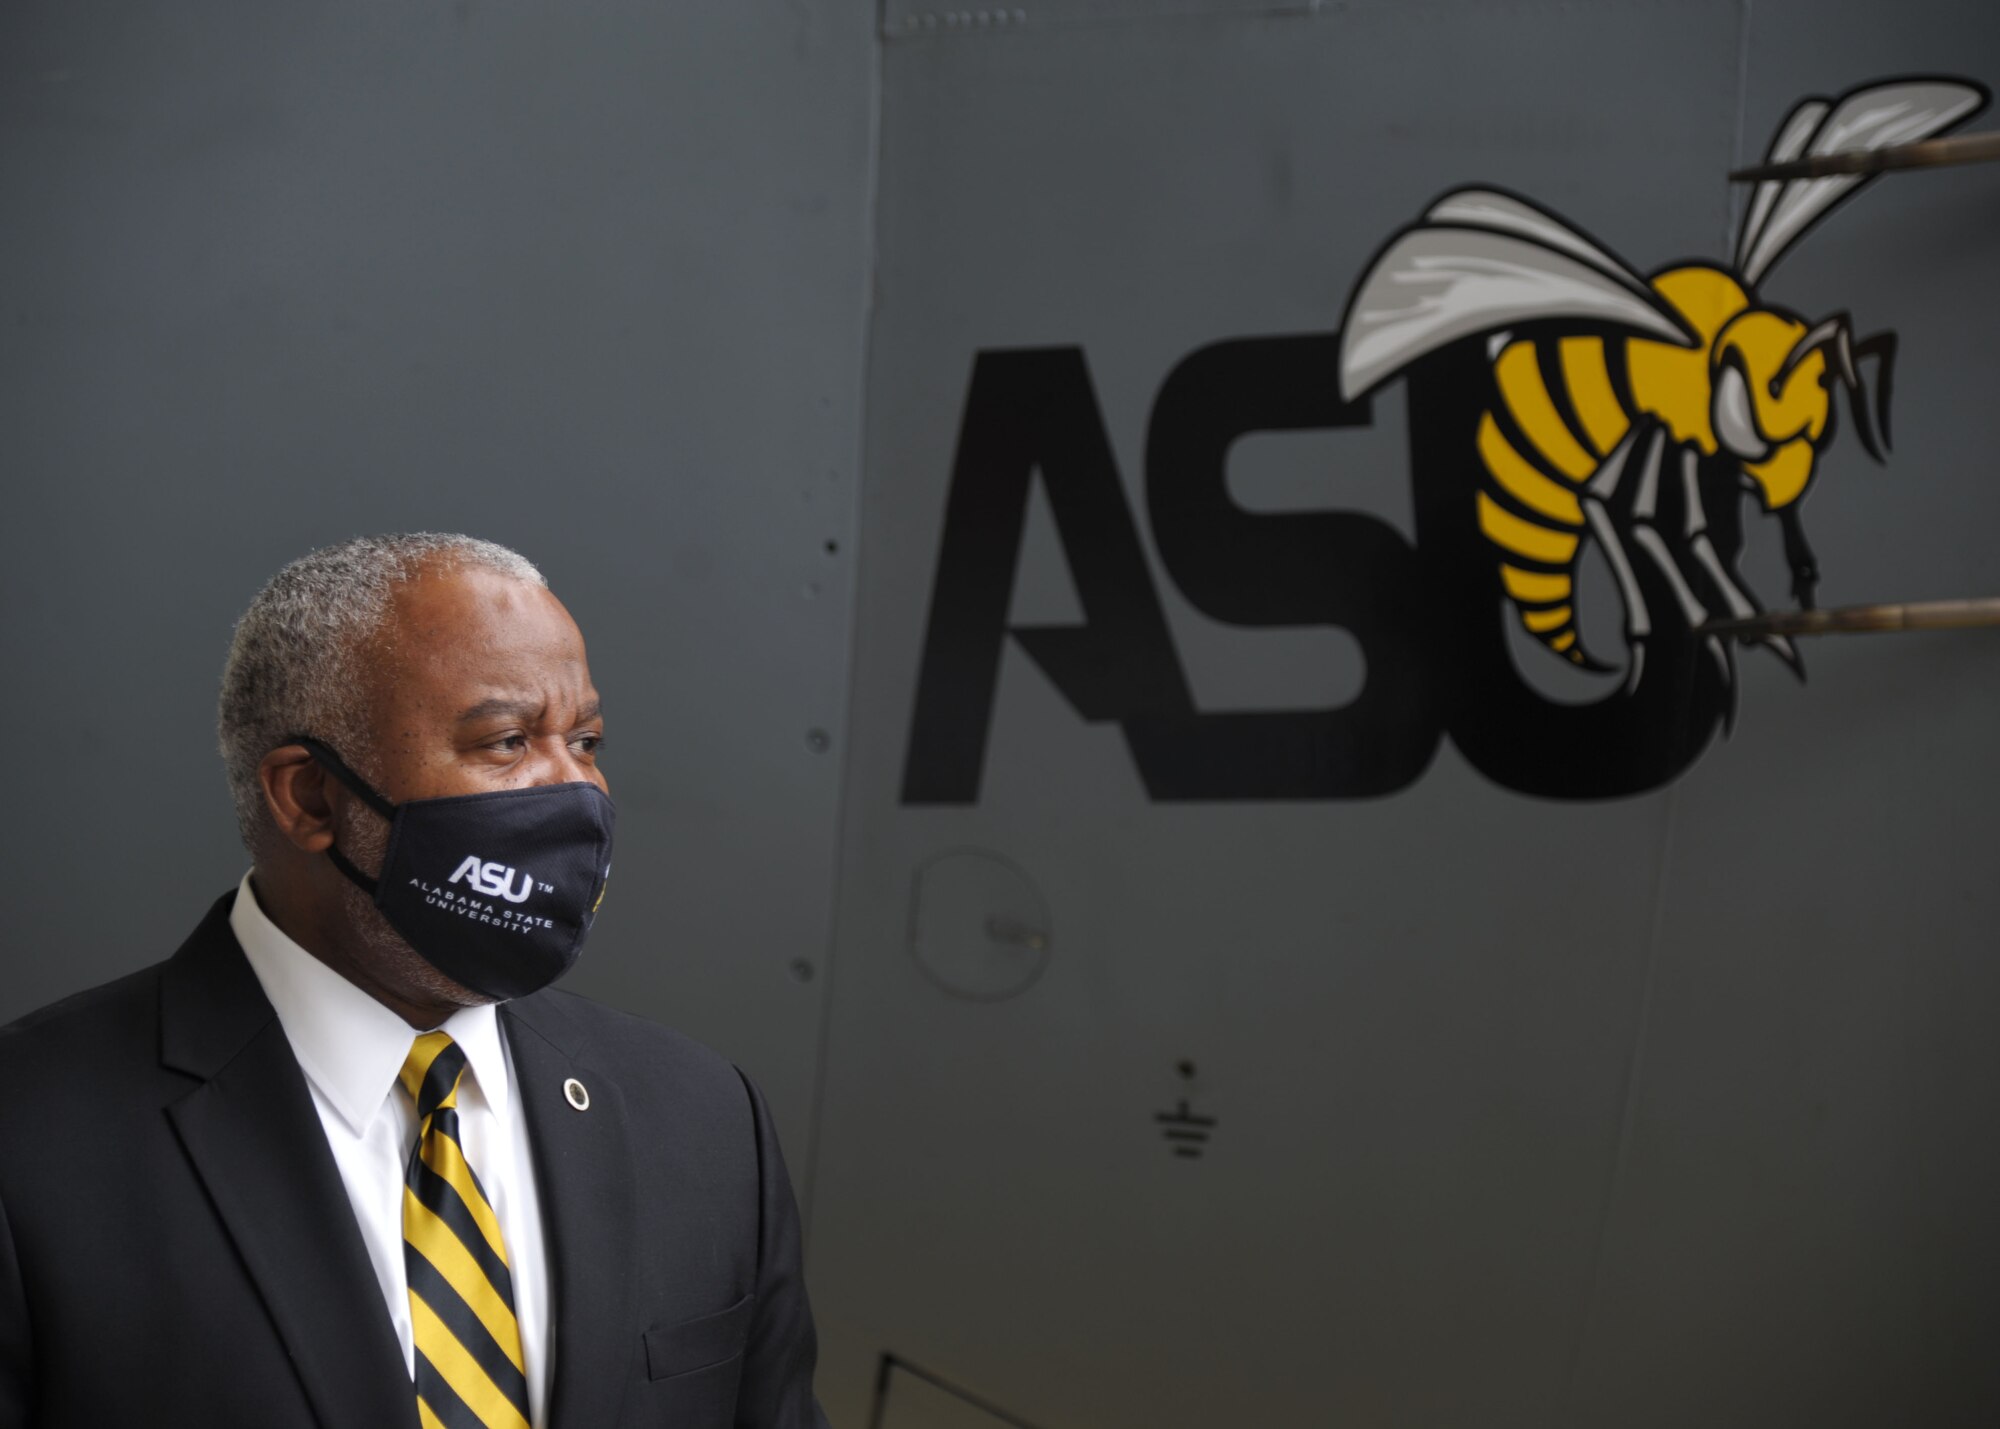 Dr. Quinton T. Ross Jr., president of Alabama State University, stands by the newly unveiled ASU nose art at Maxwell Air Force Base, Alabama. The 908th Airlift Wing commemorated its partnership with ASU by painting the university’s logo on the nose of one of its C-130 H aircraft. (U.S. Air Force photo by Senior Airman Max Goldberg)